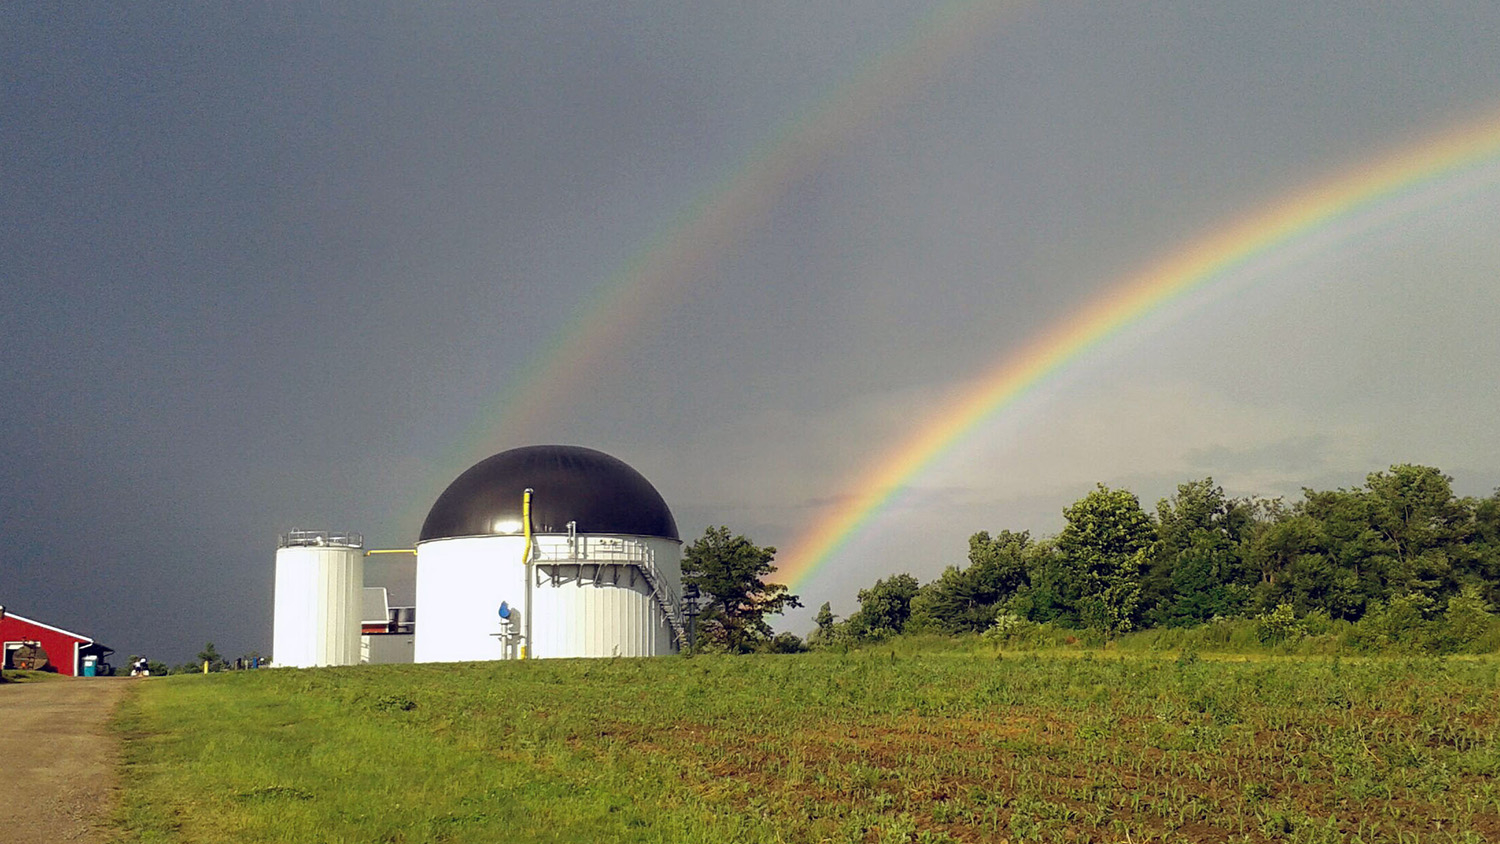 anaerobic digester on a dairy farm with rainbow in background